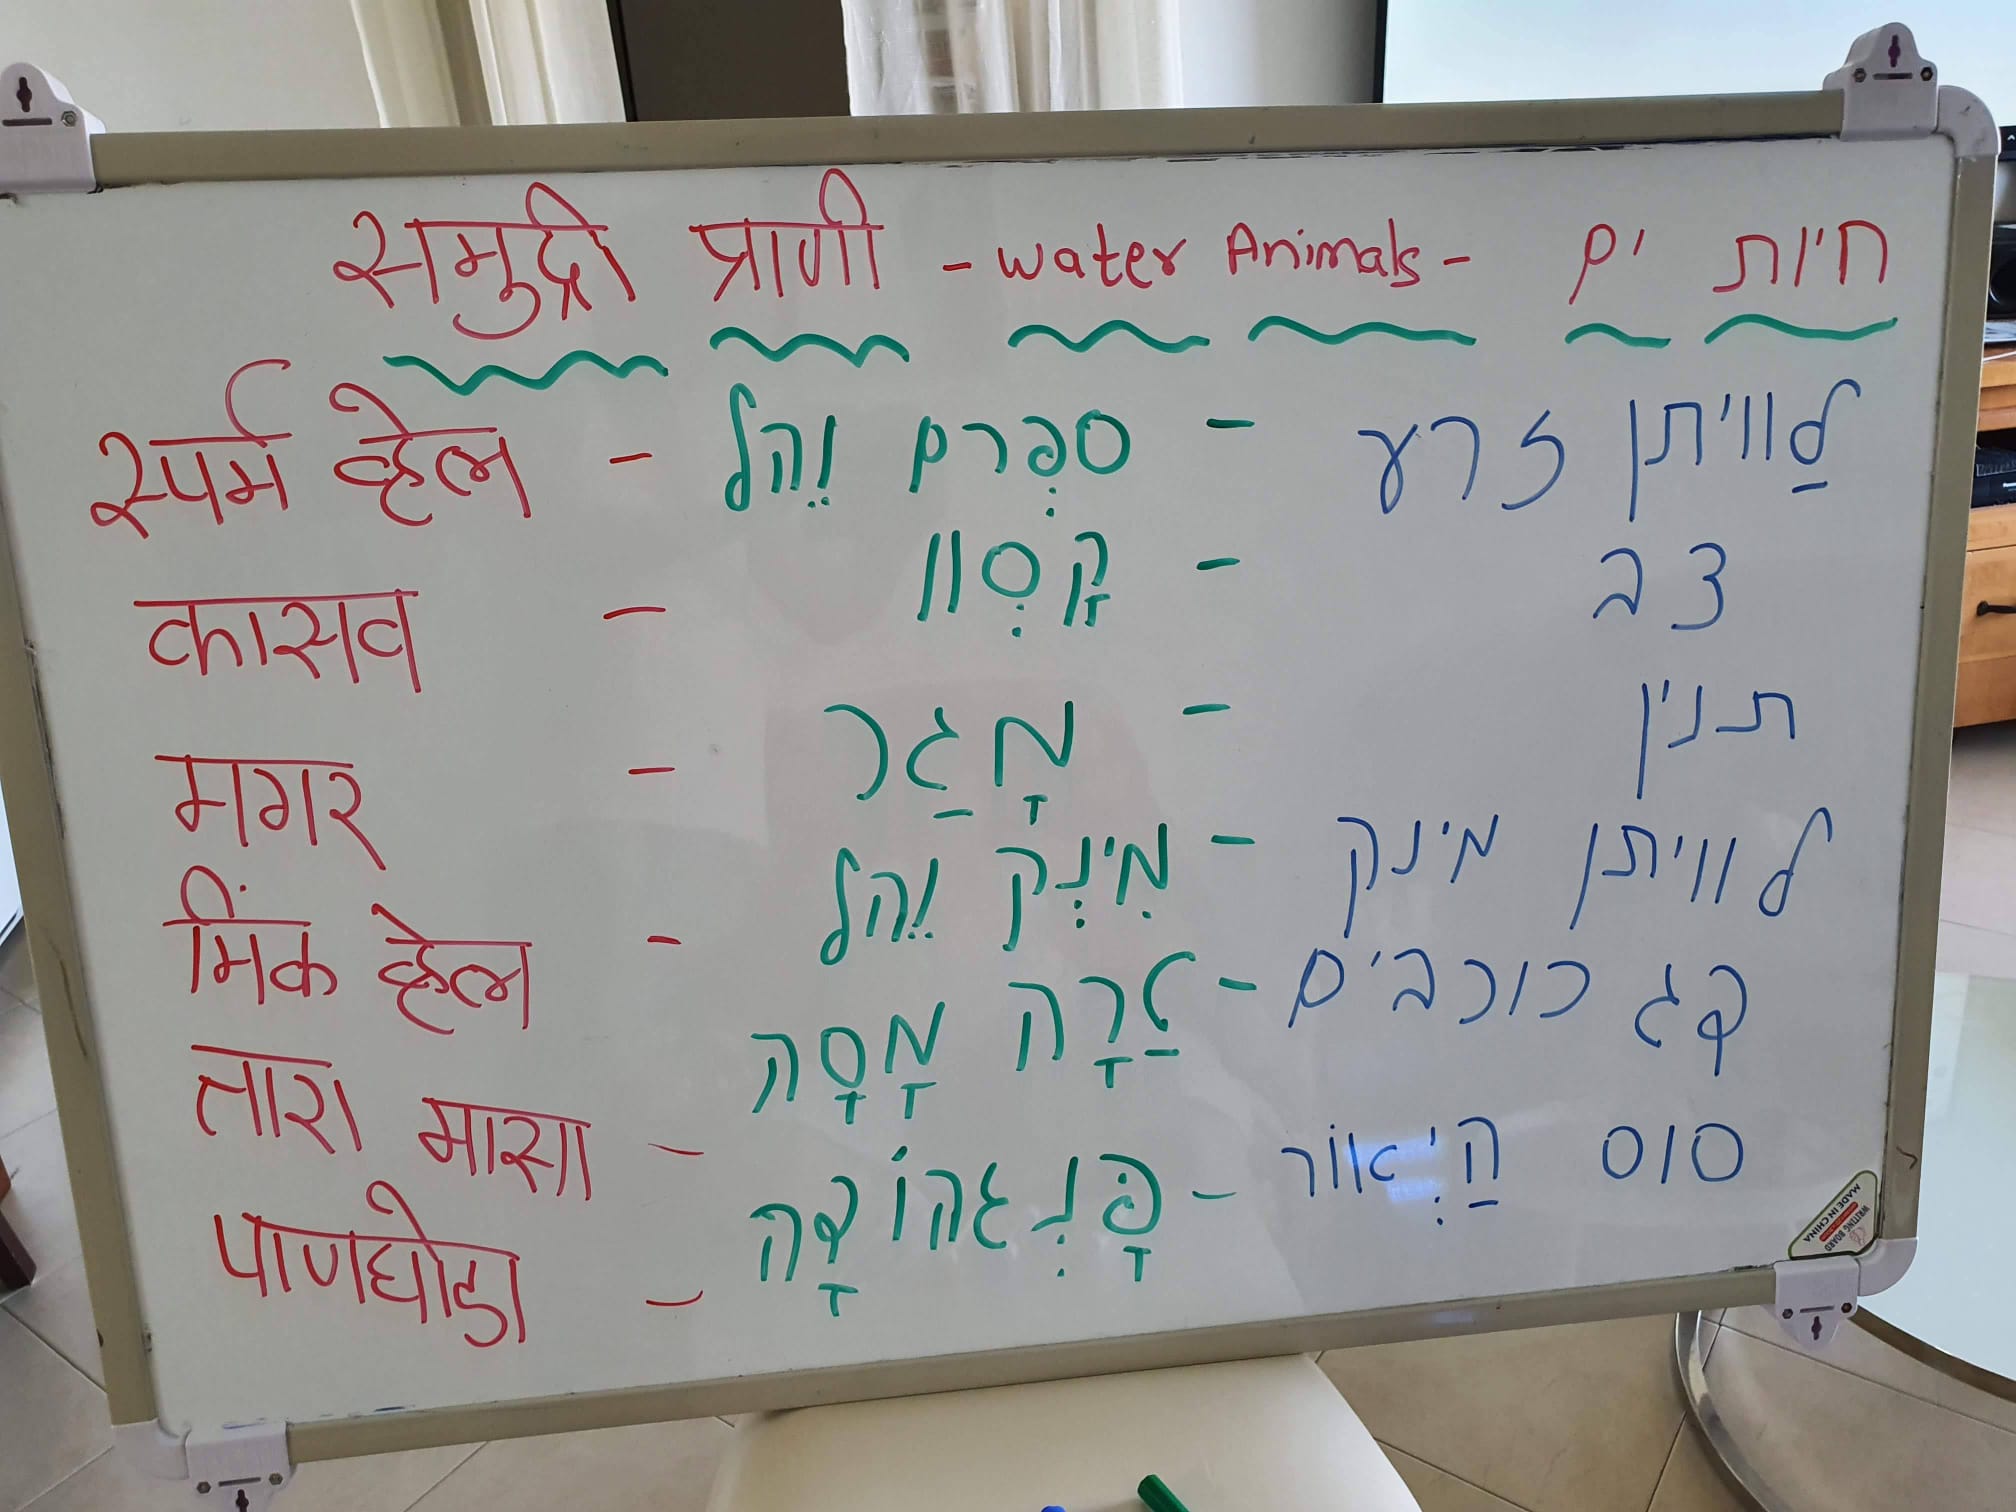 Names of water animals in Marathi and Hebrew - Learn Marathi With Kaushik